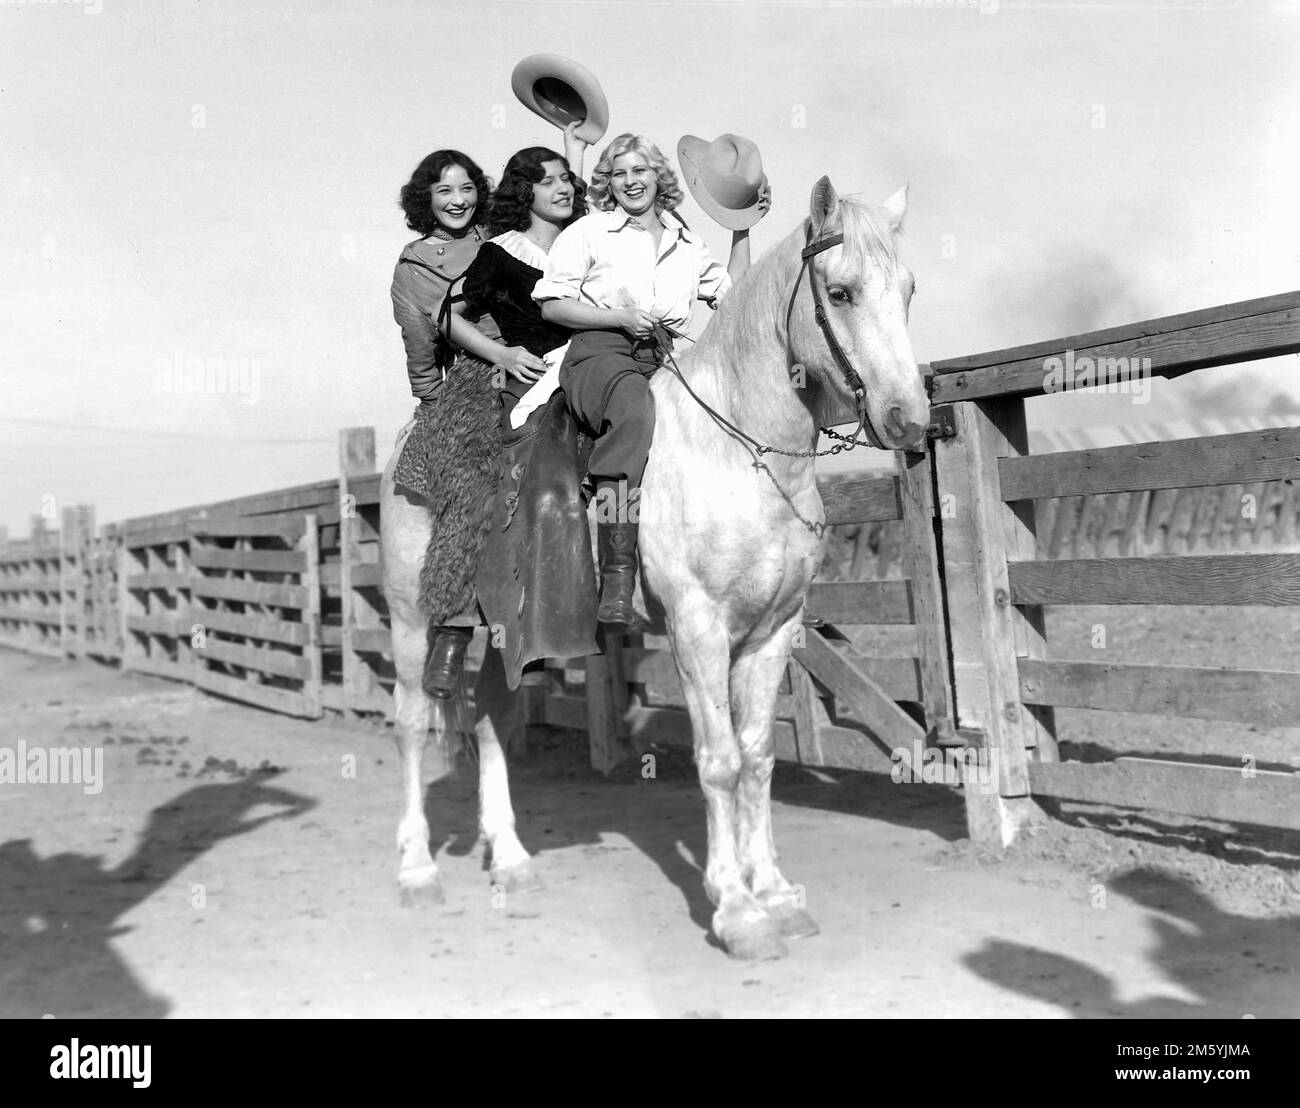 Promotional photo for the 1932 World's Congress Rough Rider Rodeo in Los Angeles. Stock Photo